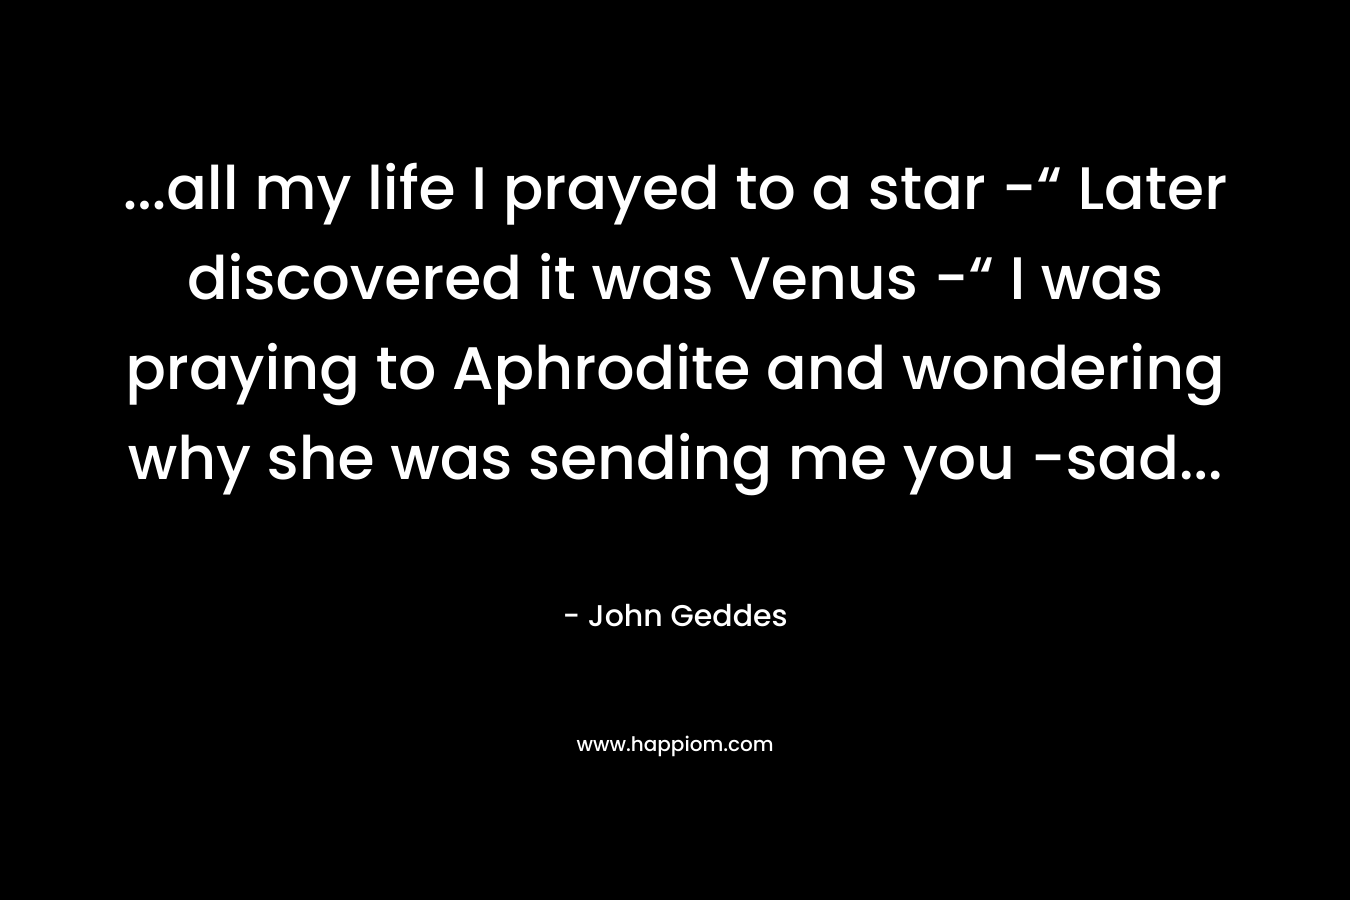 …all my life I prayed to a star -“ Later discovered it was Venus -“ I was praying to Aphrodite and wondering why she was sending me you -sad… – John Geddes